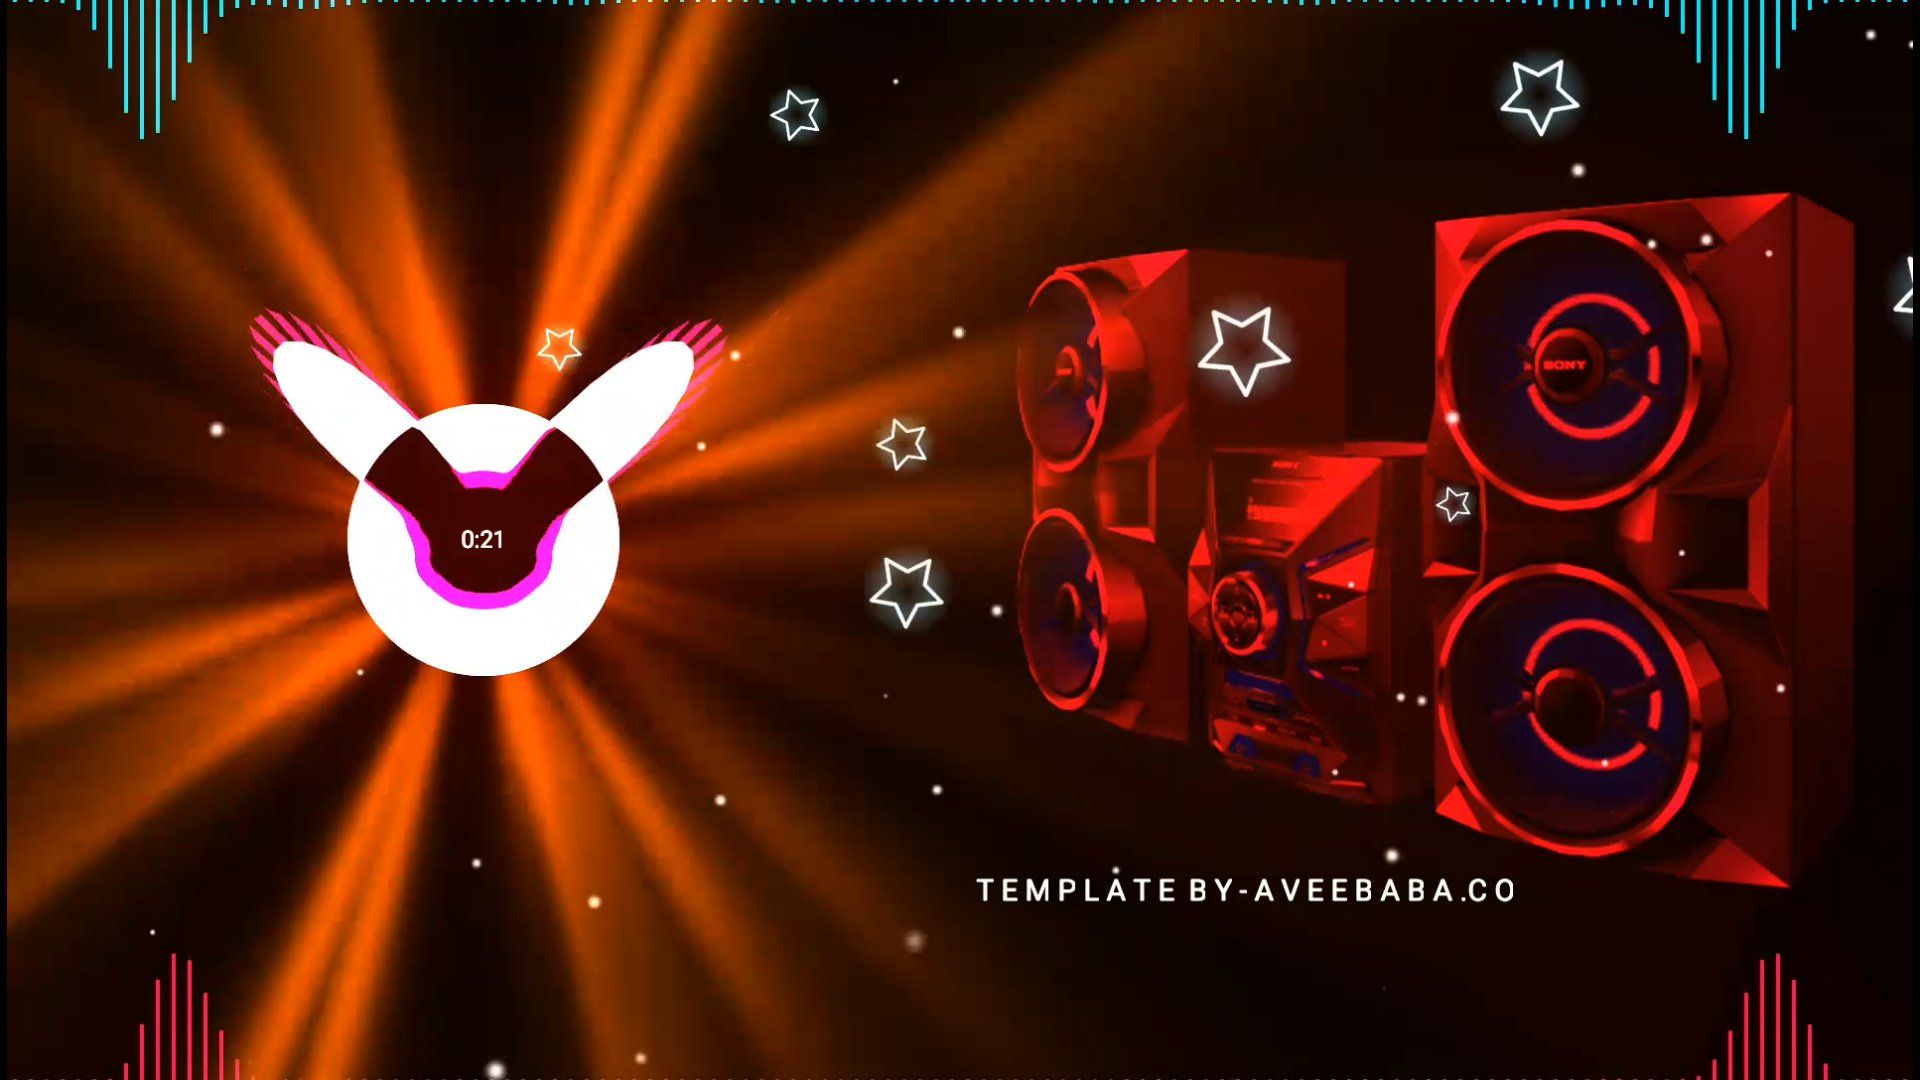 JBL Visualizer For Avee Player Dj Template Download Free 2022 aveebaba.co